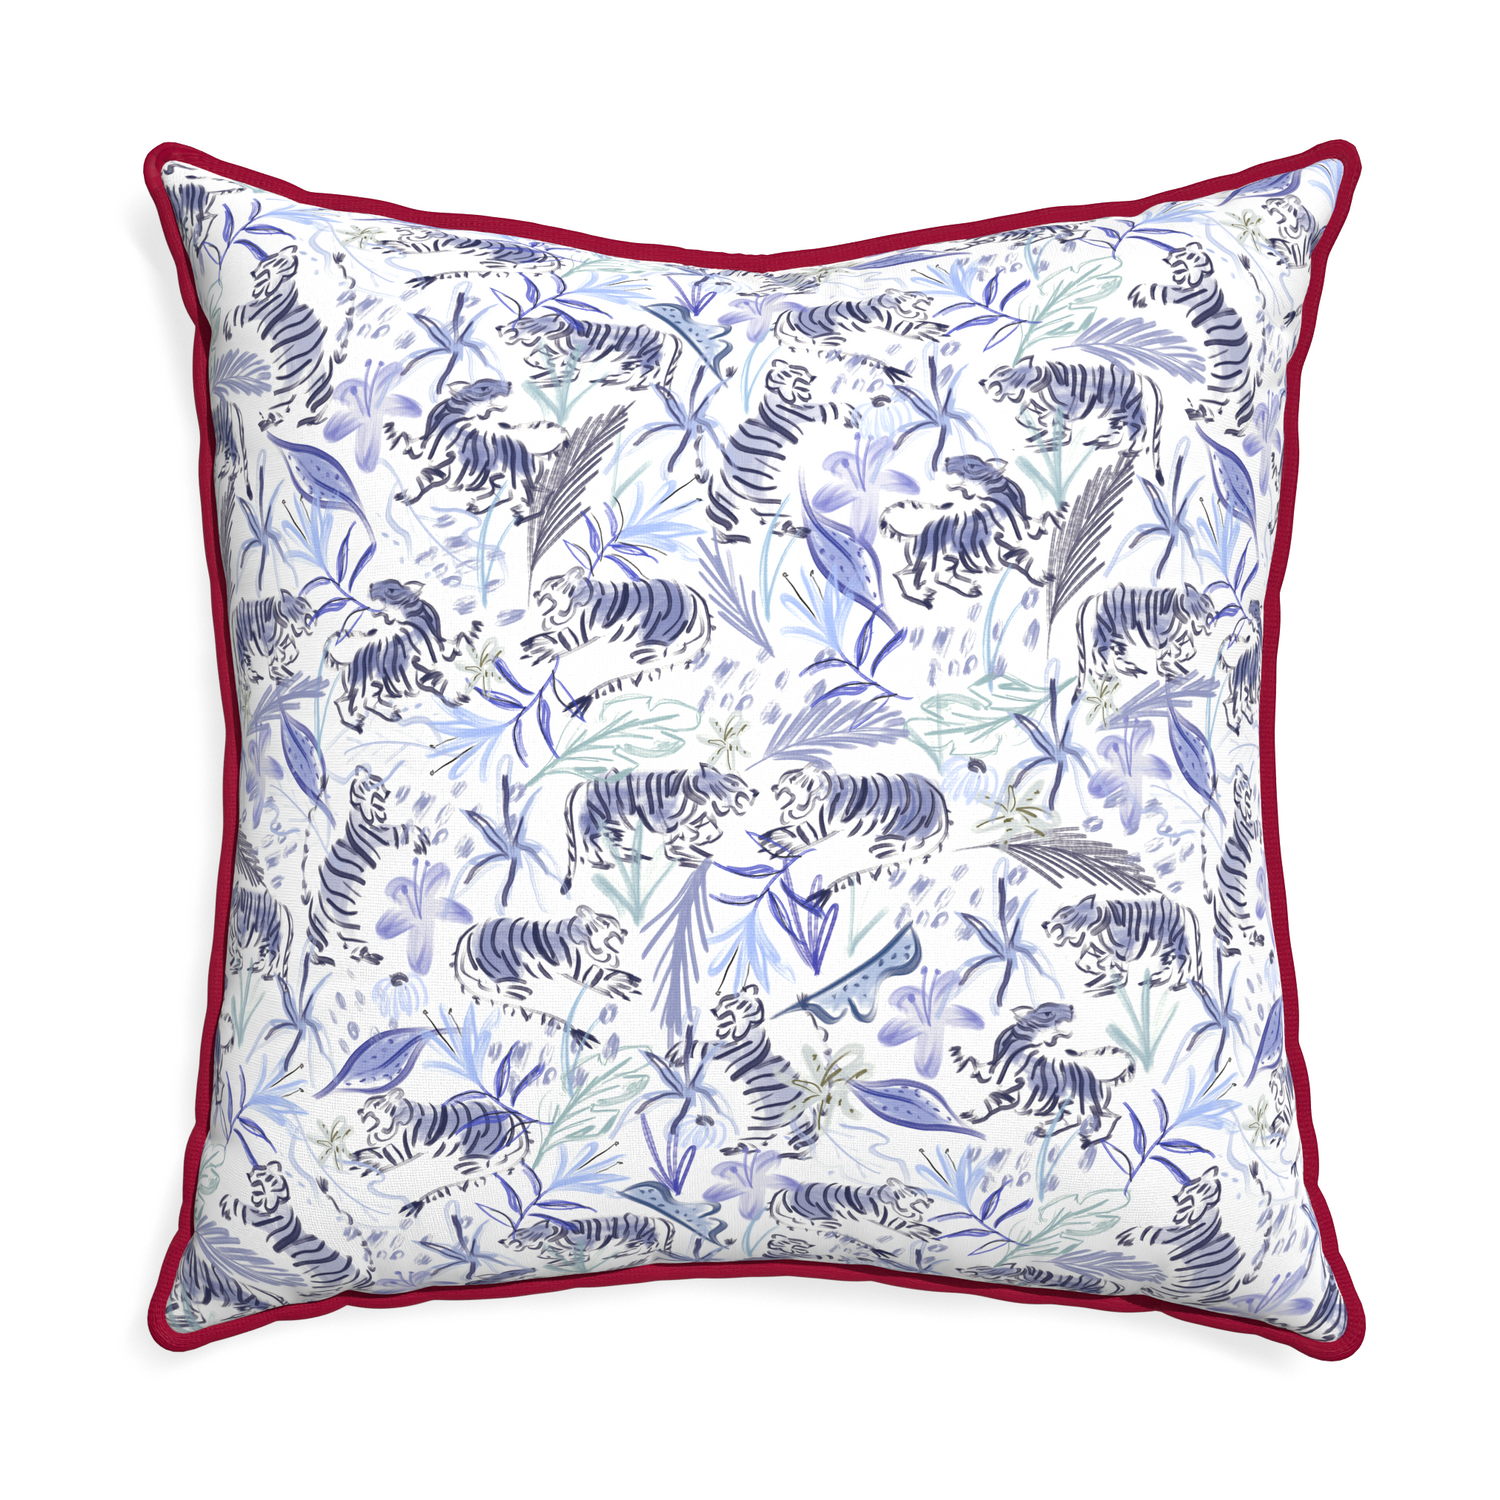 Euro-sham frida blue custom blue with intricate tiger designpillow with raspberry piping on white background